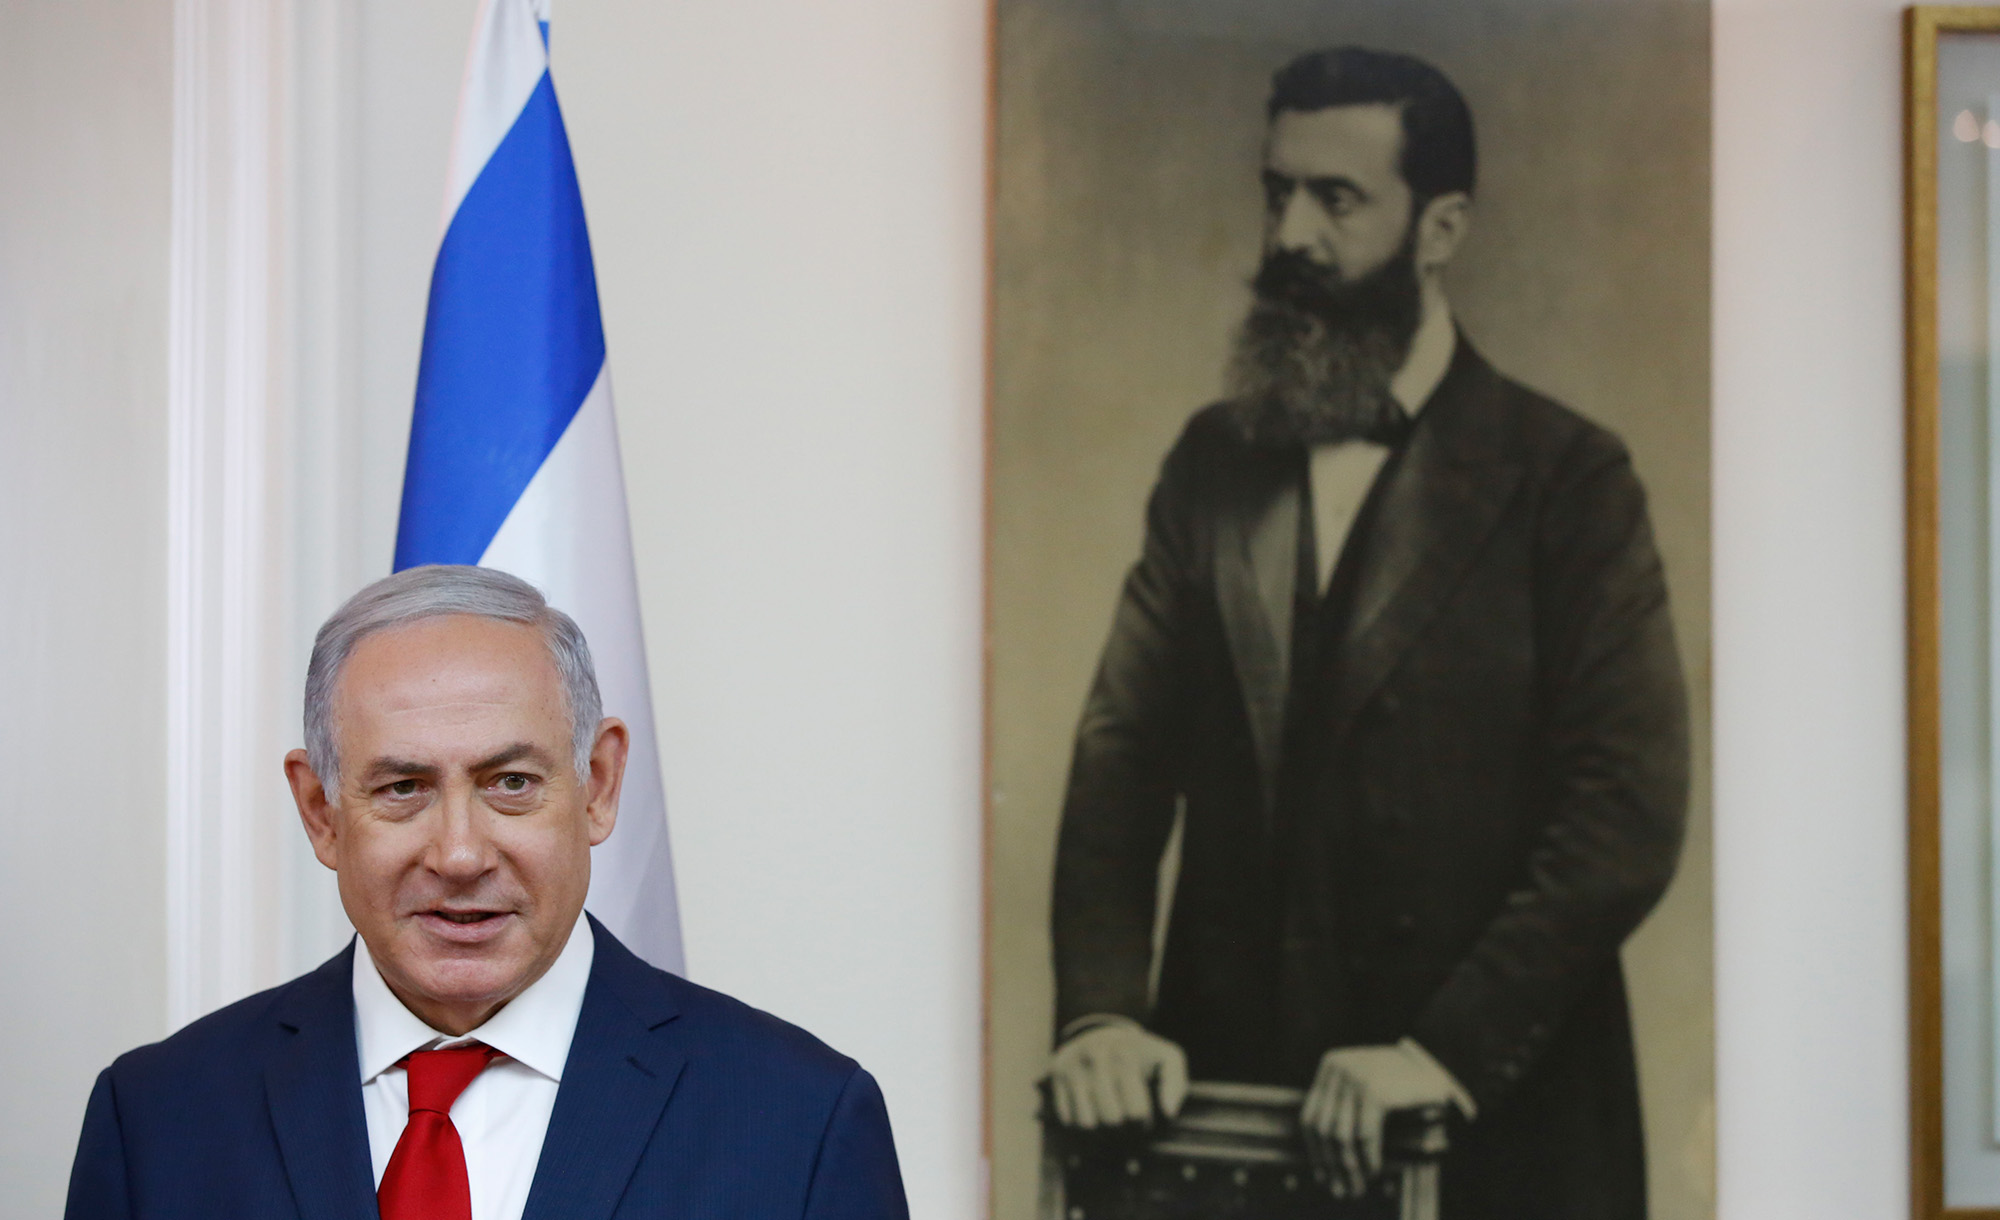 Netanyahu: The Figures Who Formed Him, and the Duties of Jewish Leadership